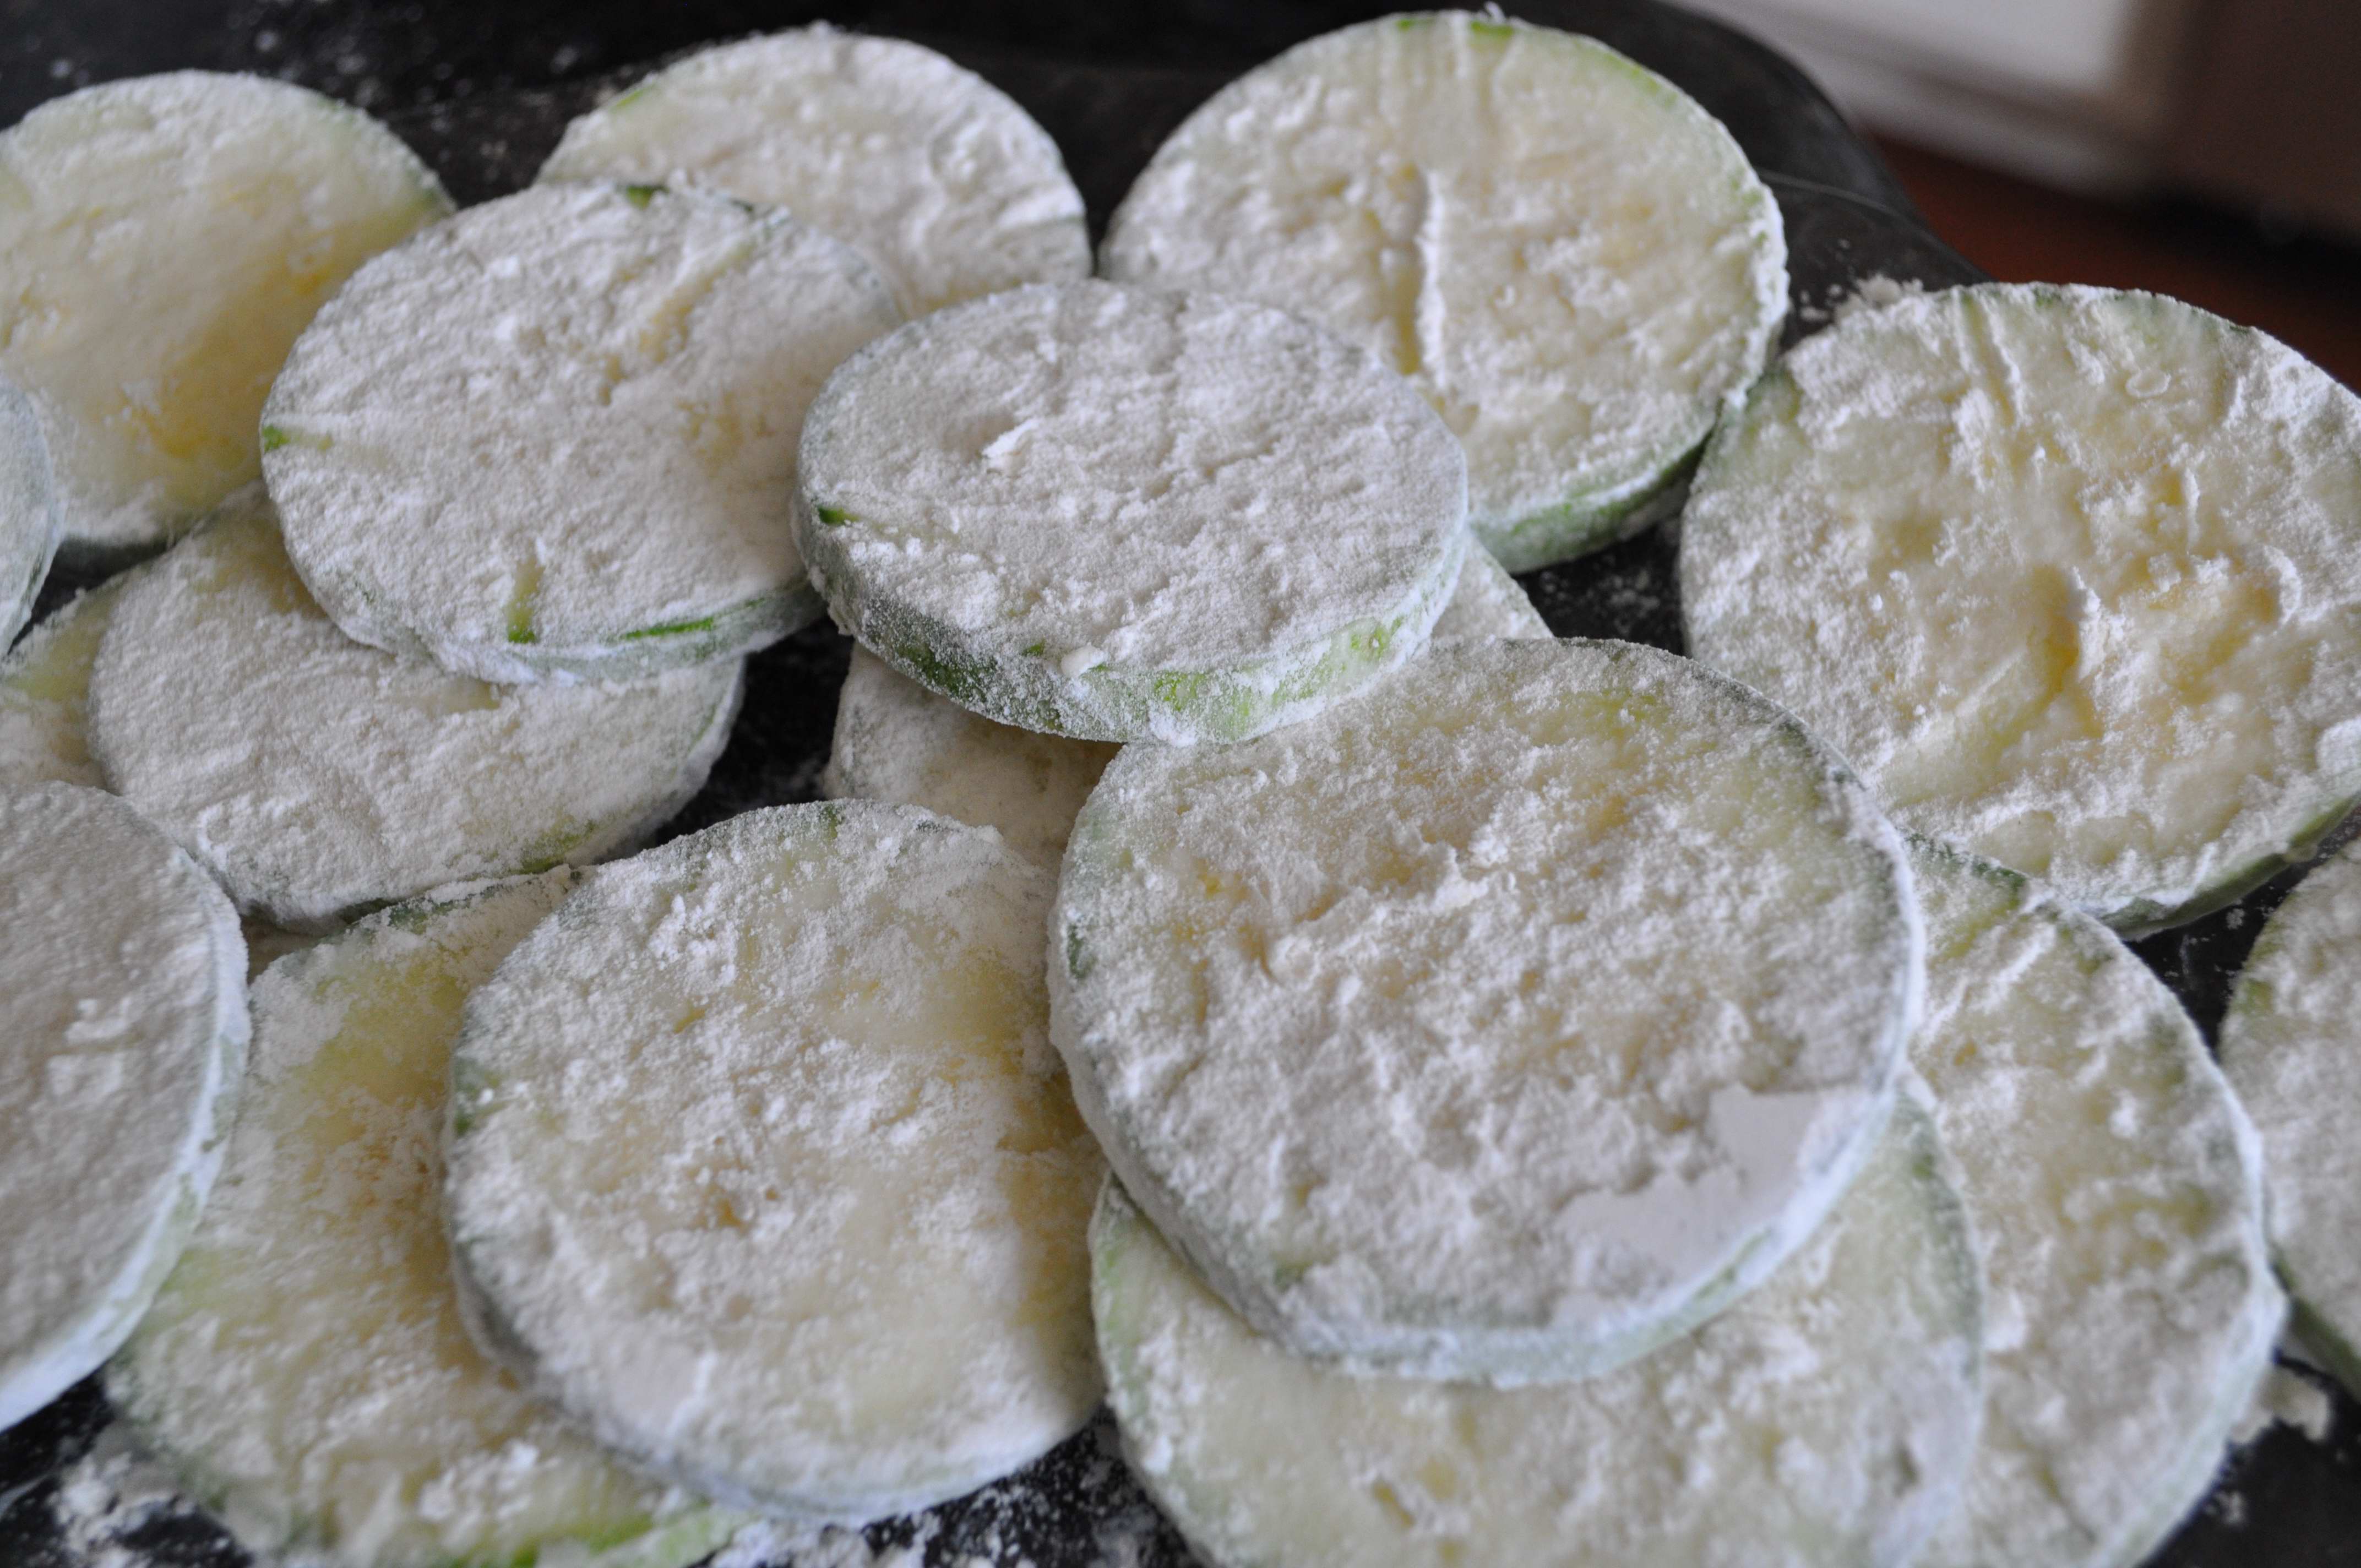 zucchini all coated with flour!